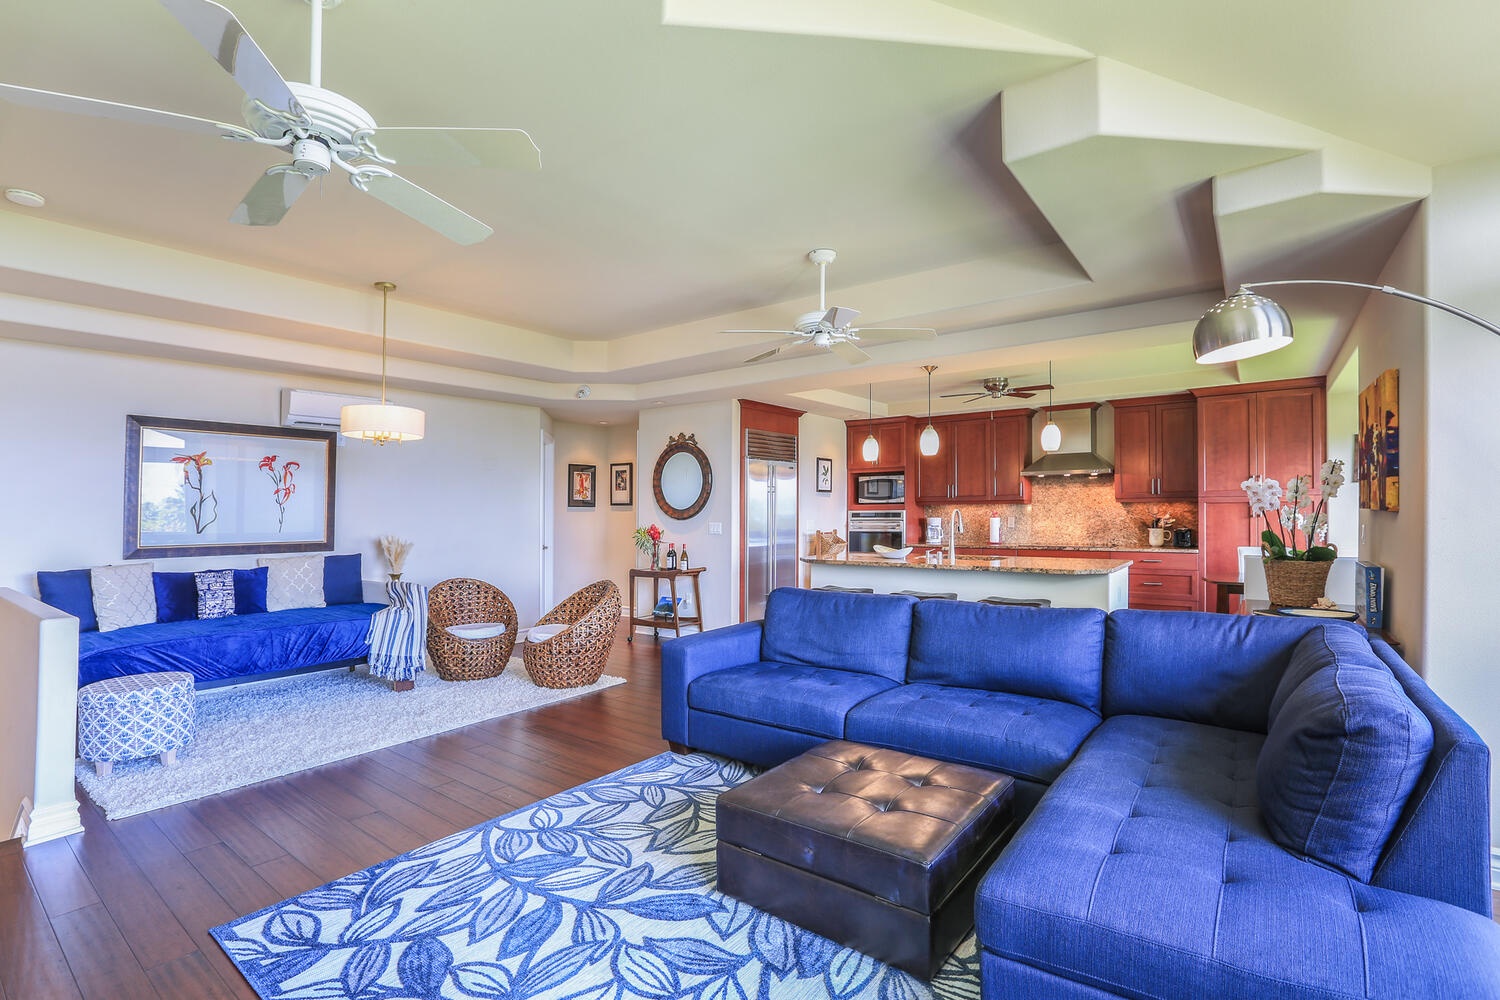 Princeville Vacation Rentals, Noelani Kai - Kitchen area right off the living space